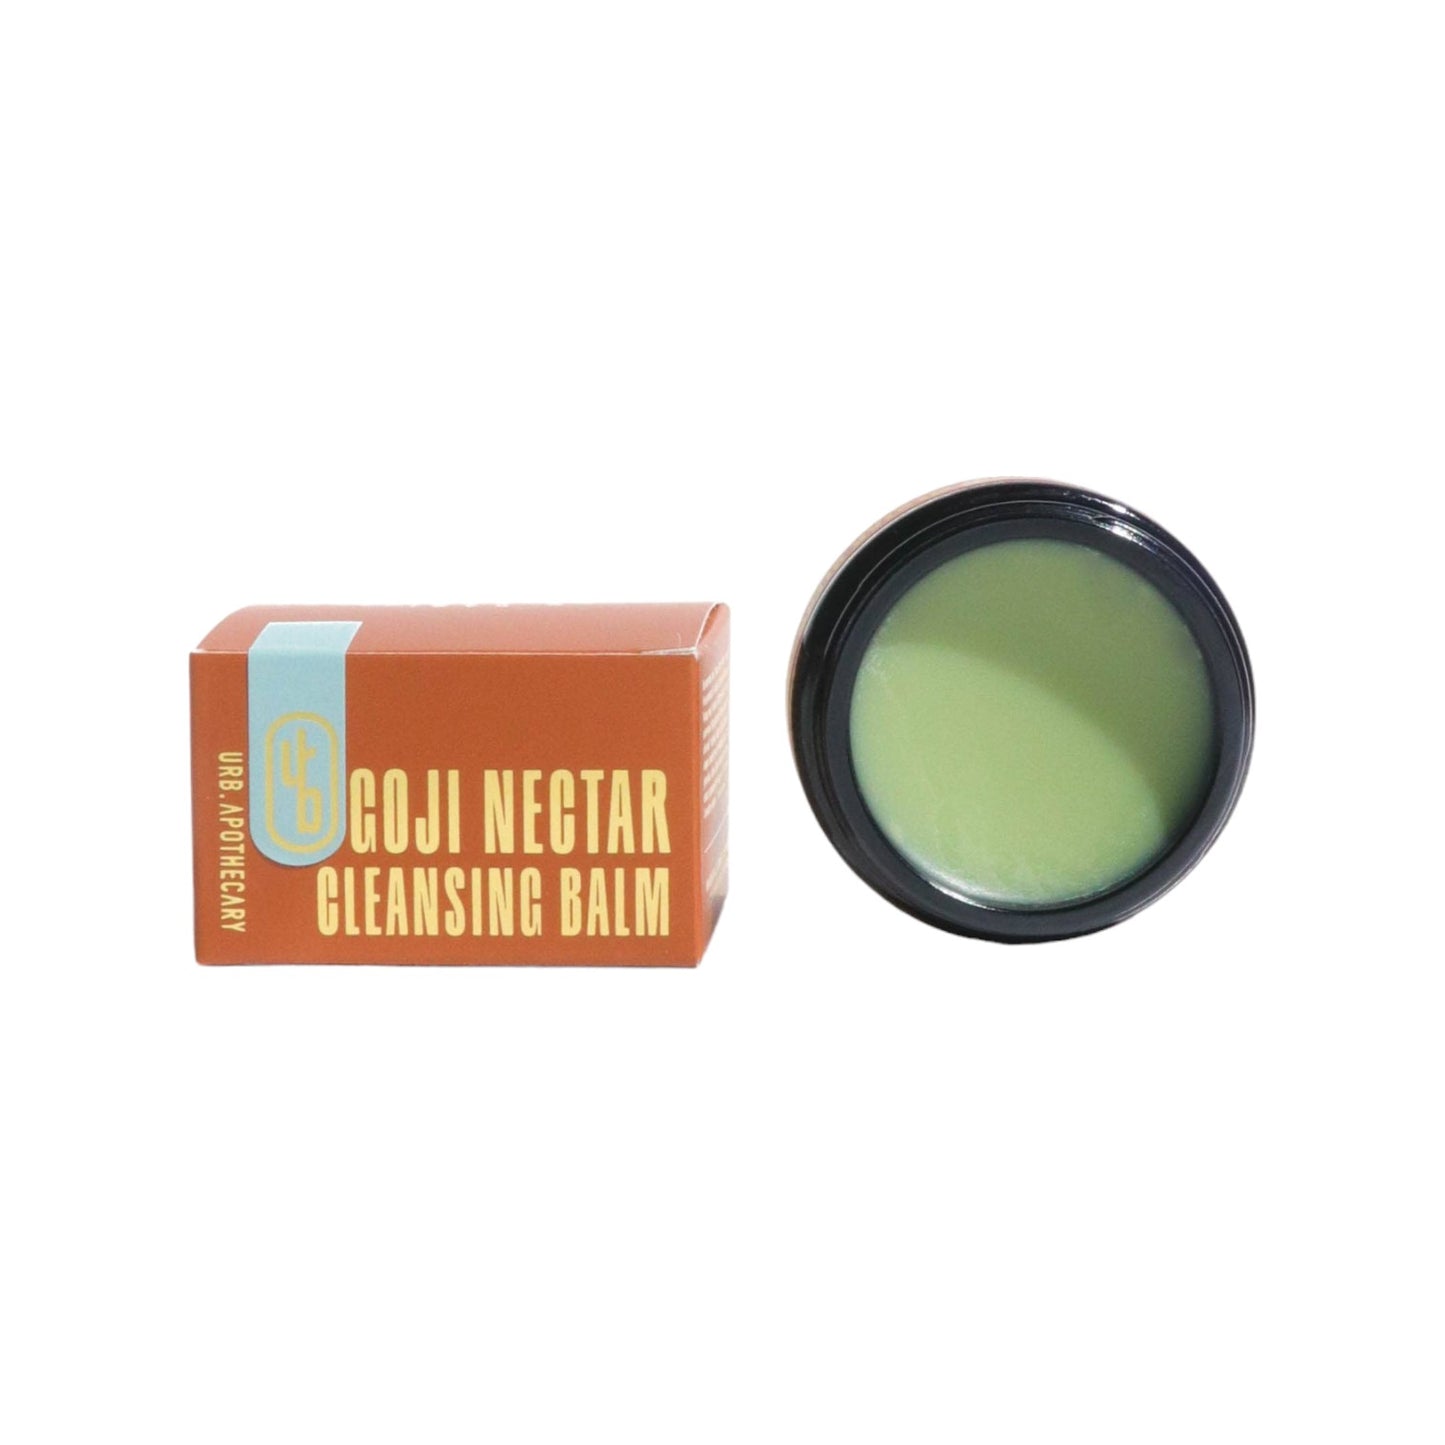 Box and open jar of the Goji Nectar Cleansing Balm